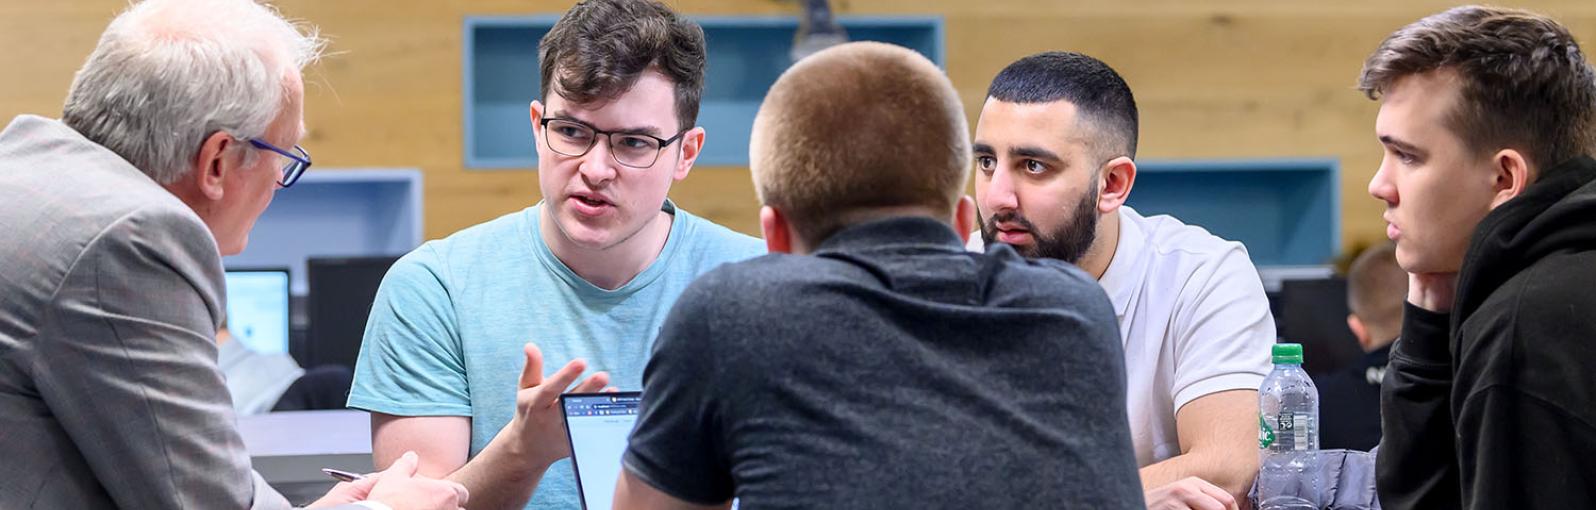 Computer science students talking with tutor